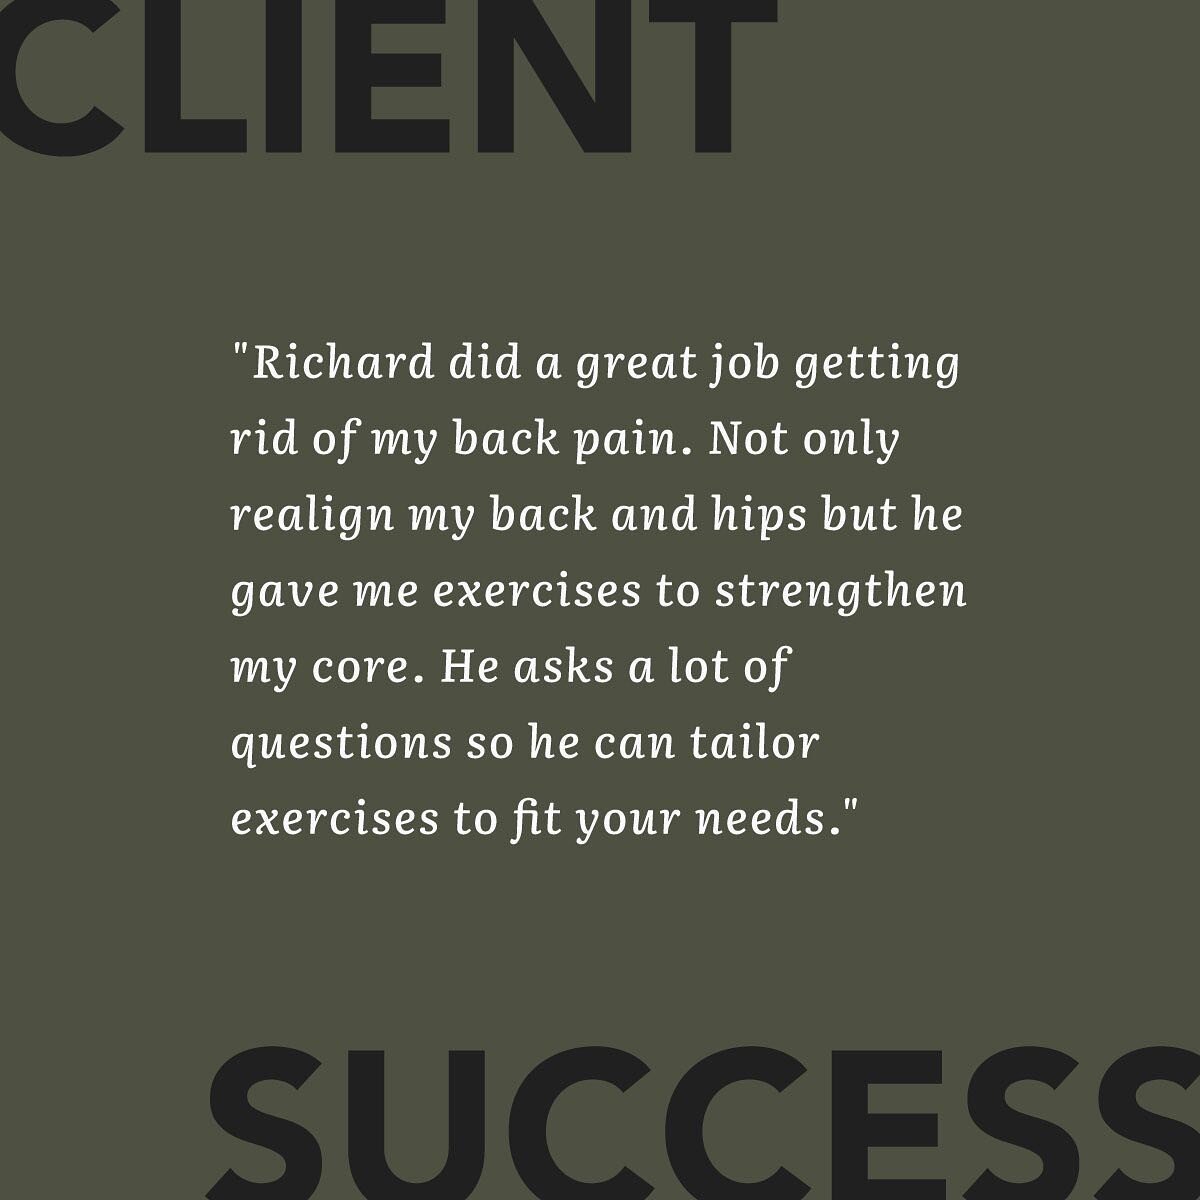 We love seeing our customized treatment plans working for our patients! Don't continue to be held back by pain. Schedule an appointment with us to get back to doing what you love: acceleratesportandspine.com

#aceleratesportandspine #chiropractor #sp